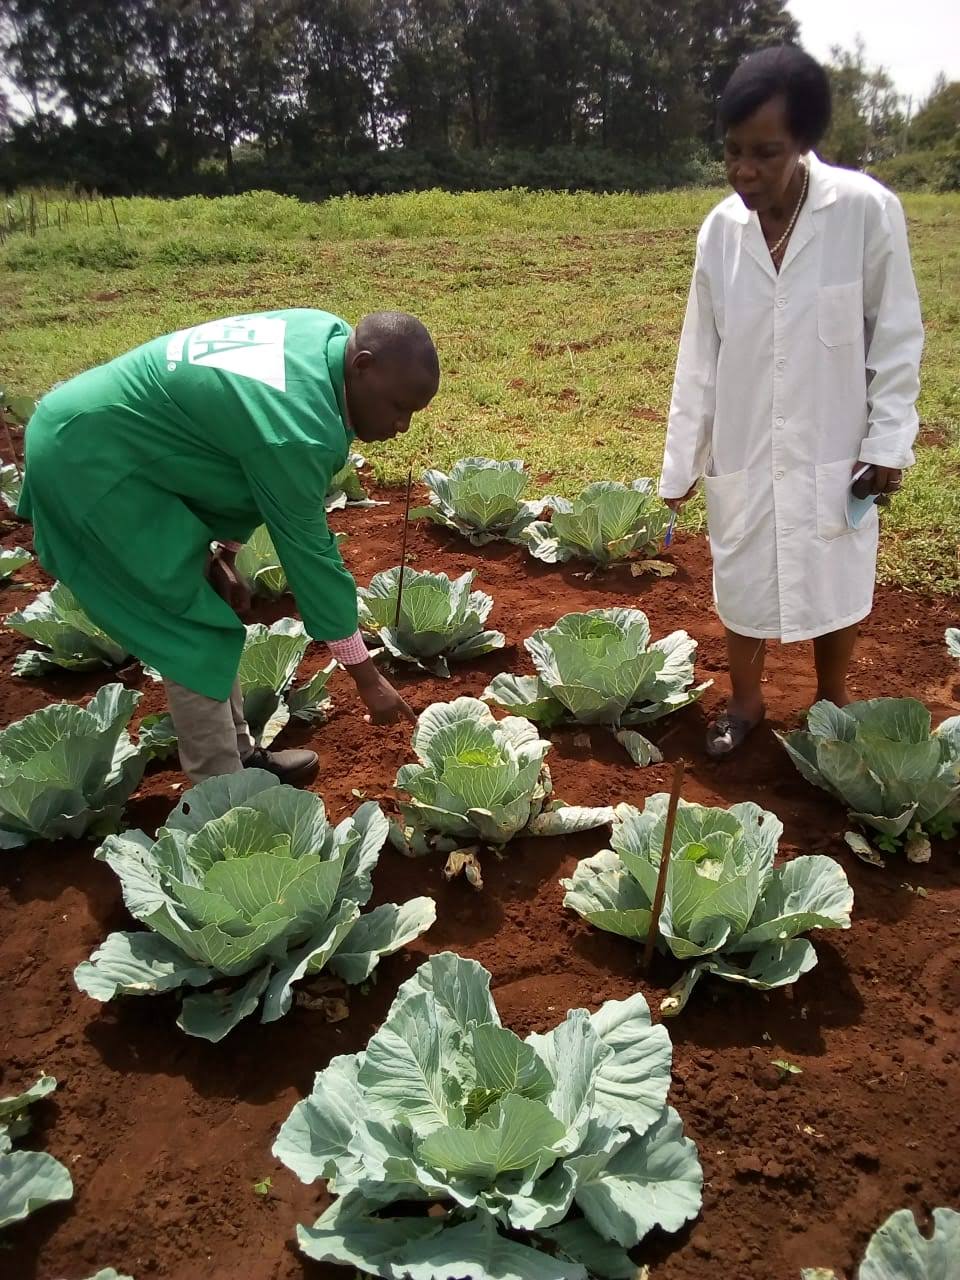 Efficacy trials of new pestcides for management of cabbage pests